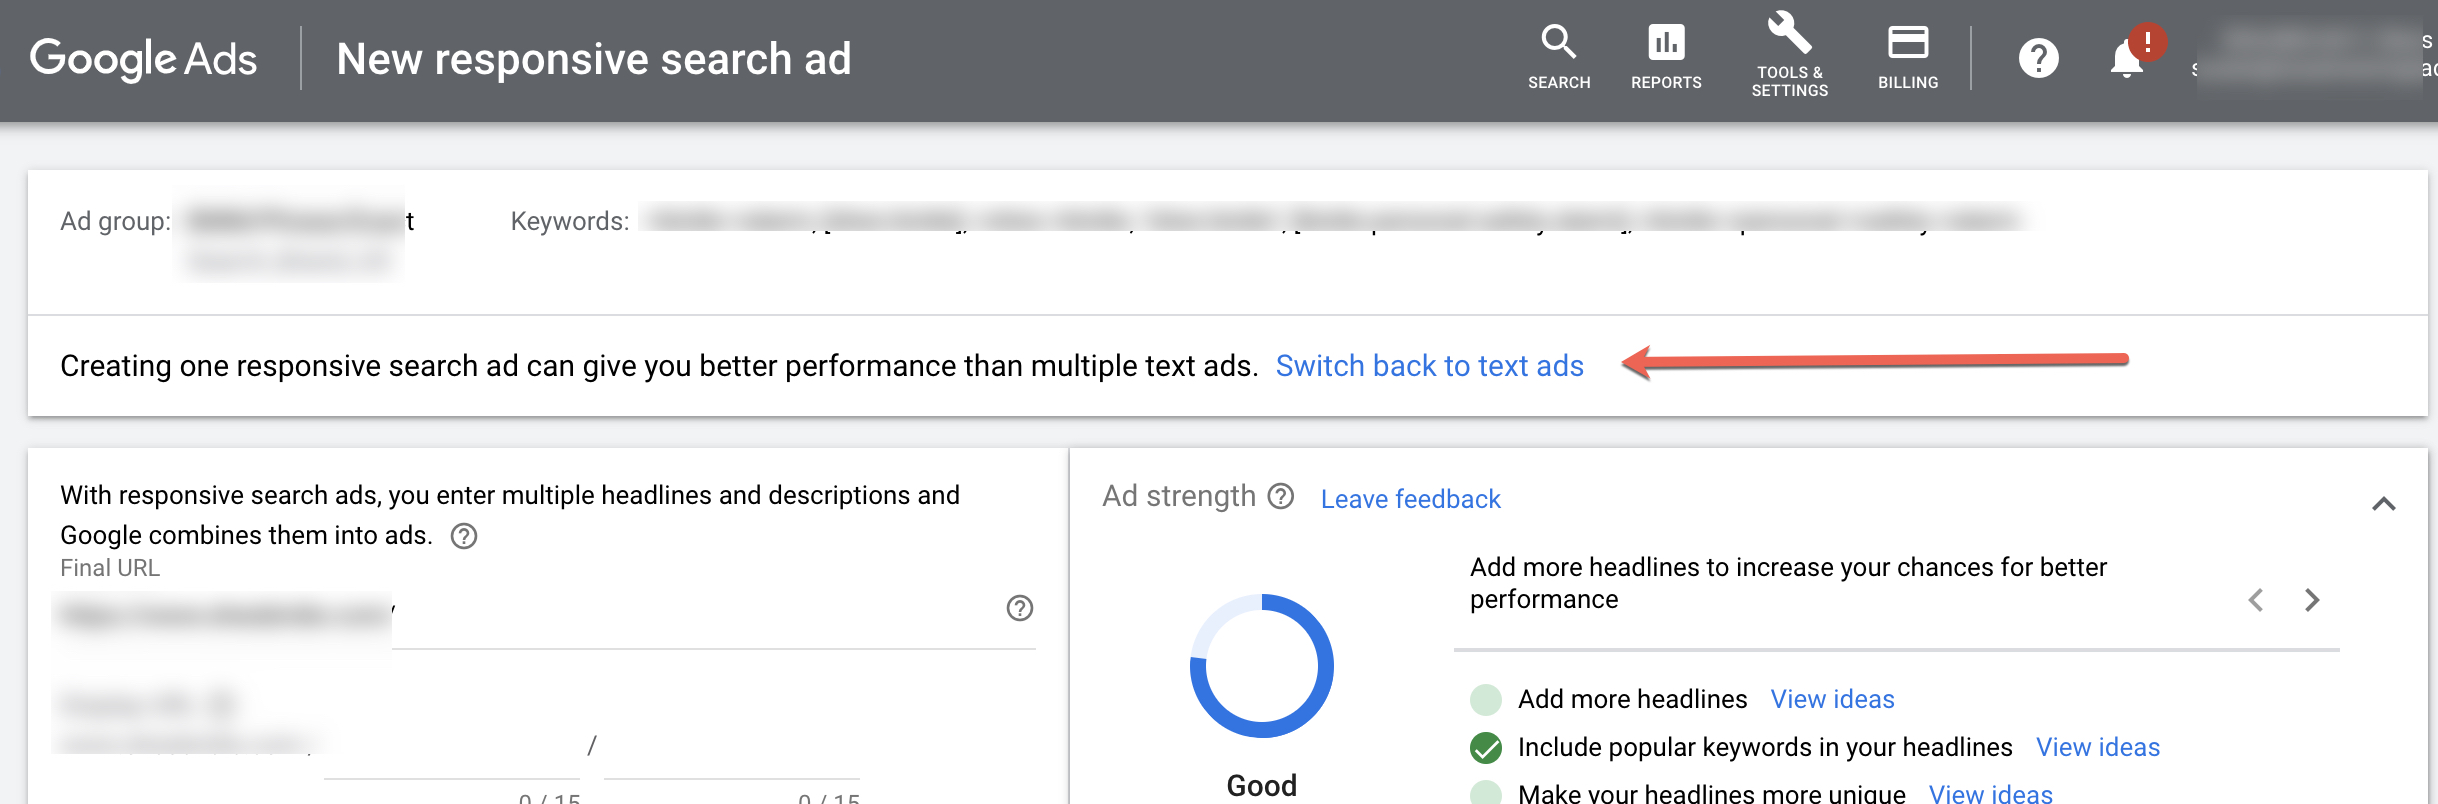 Responsive Search Ads Are Now Default Type for Google Ads